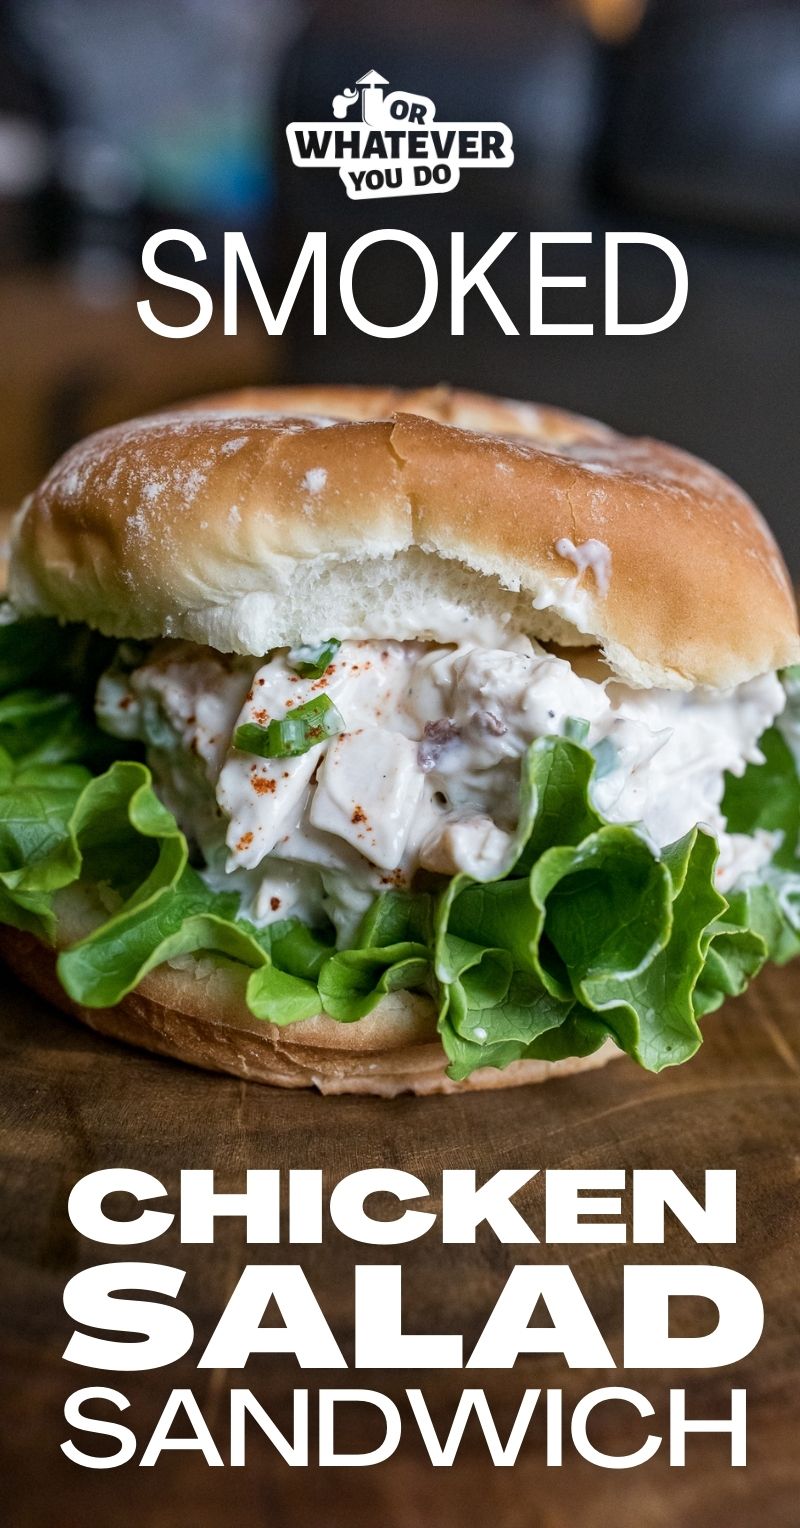 Smoked Chicken Salad Sandwich – Or Whatever You Do